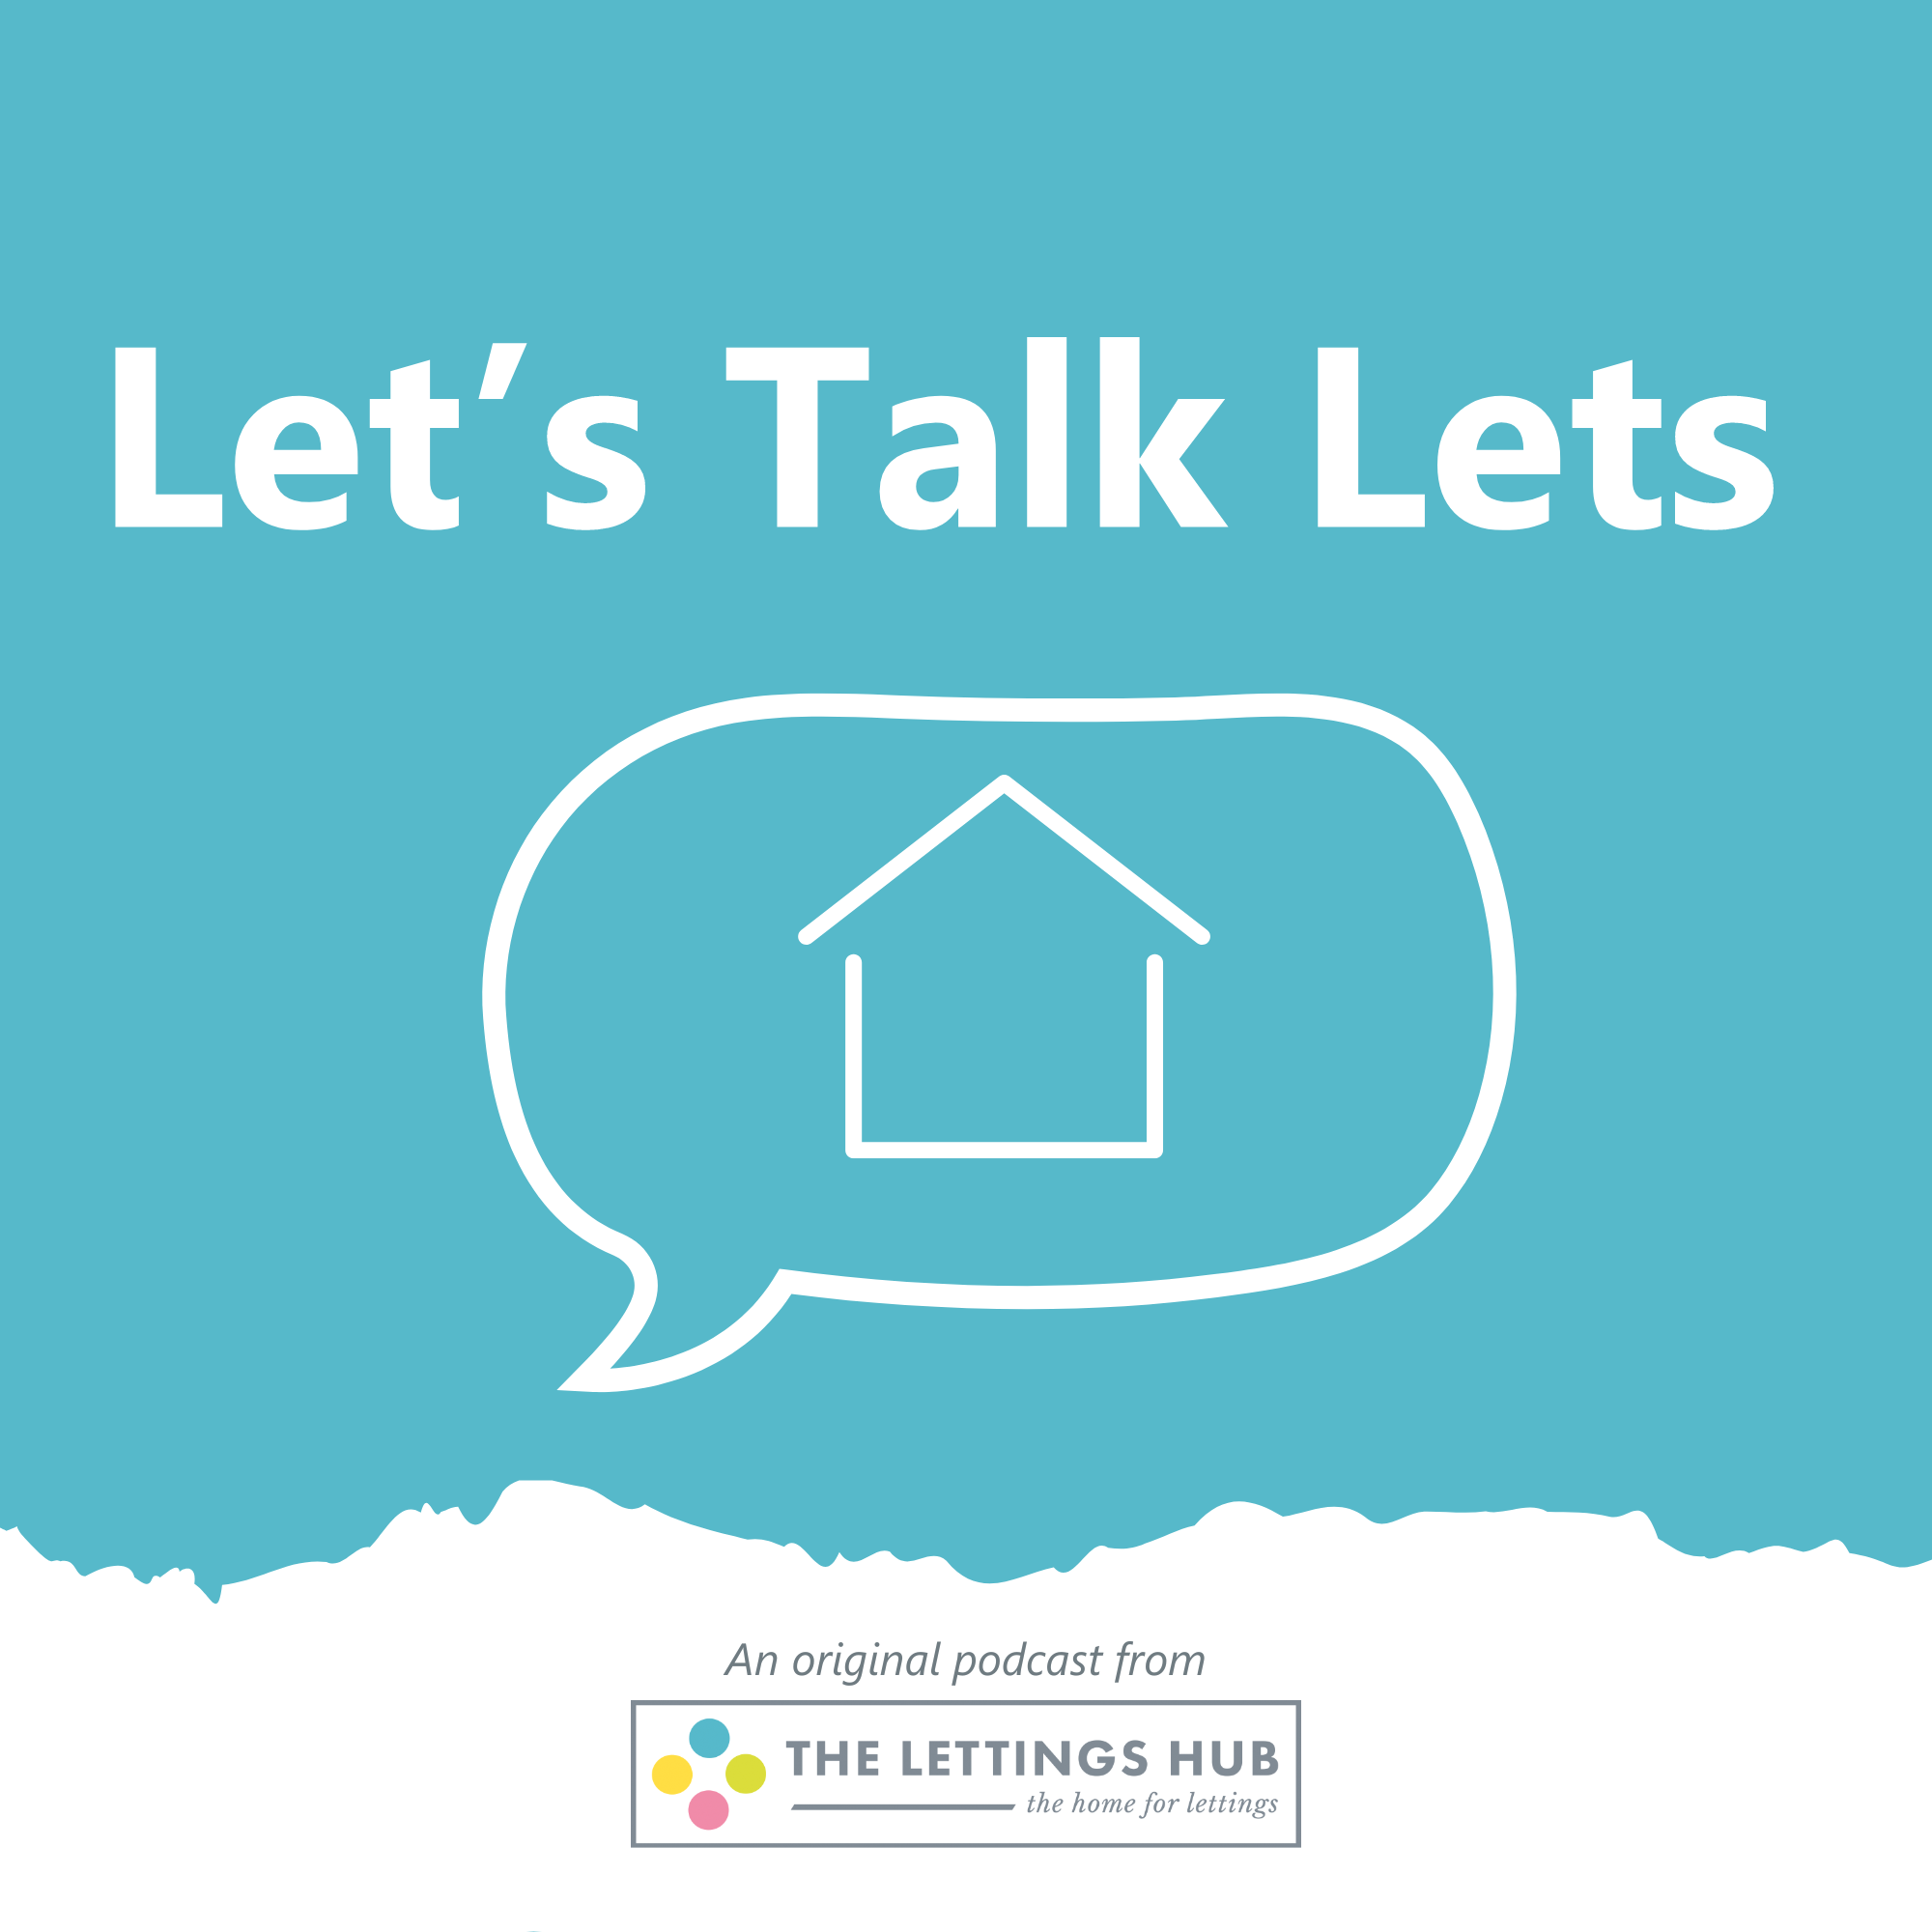 My Life in Lettings - With Paul Sloan (Let's Talk Lets)